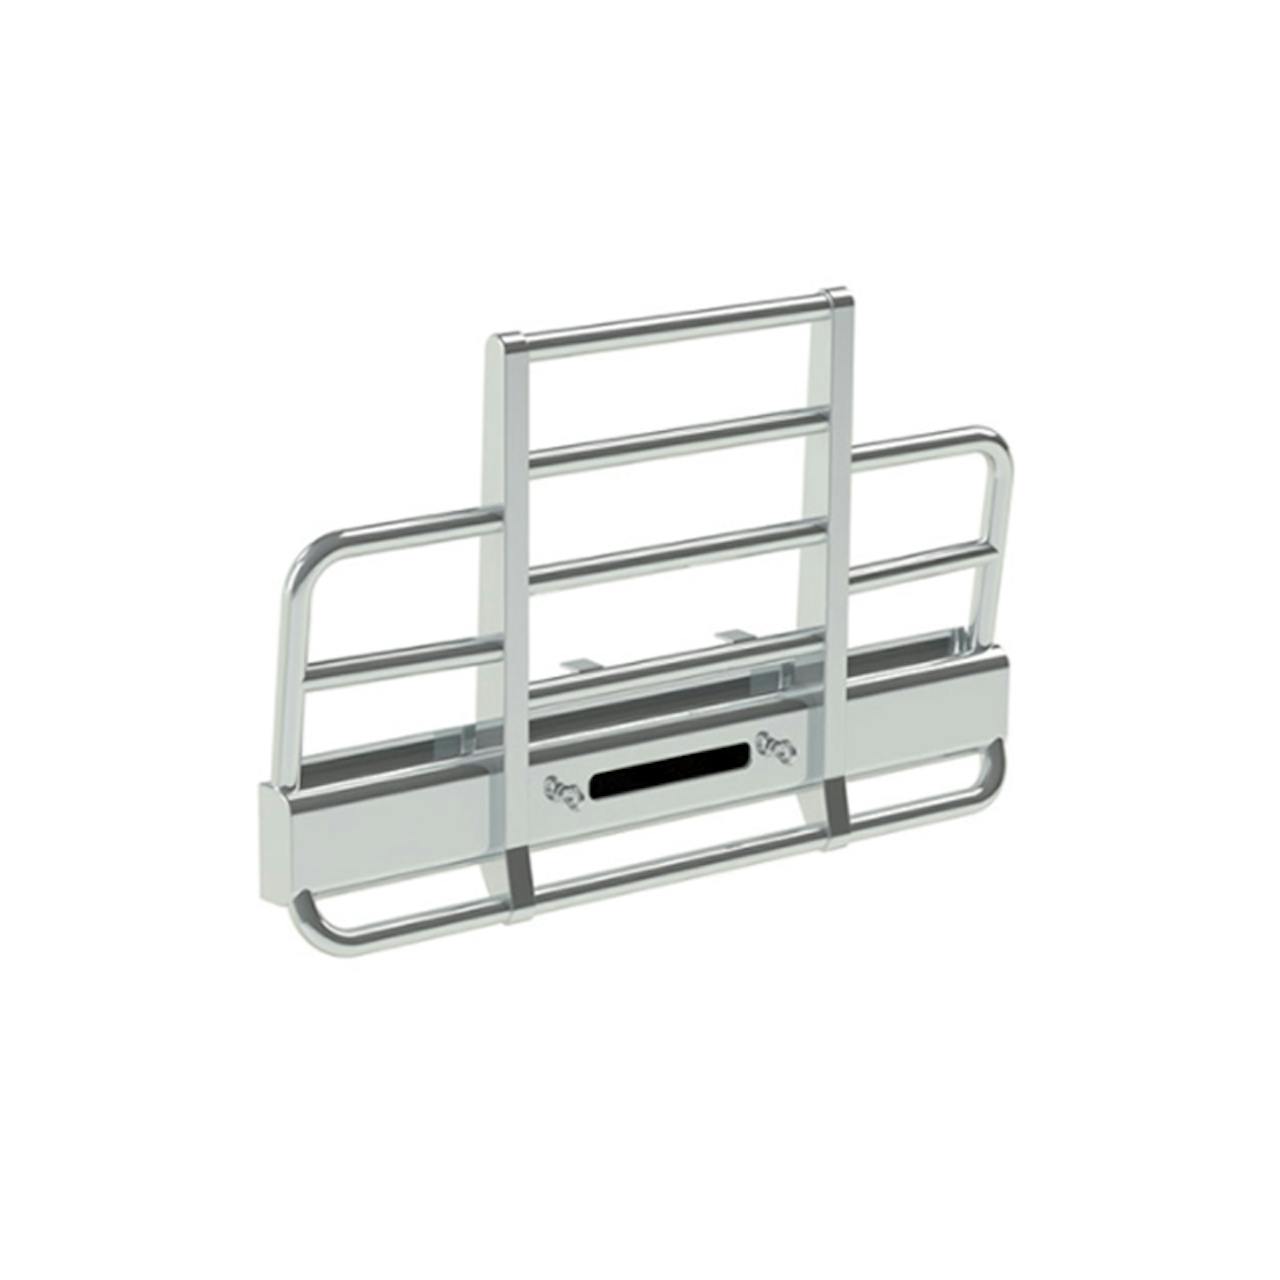 Home - HERD Grille Guards, Cab Racks & Truck Accessories